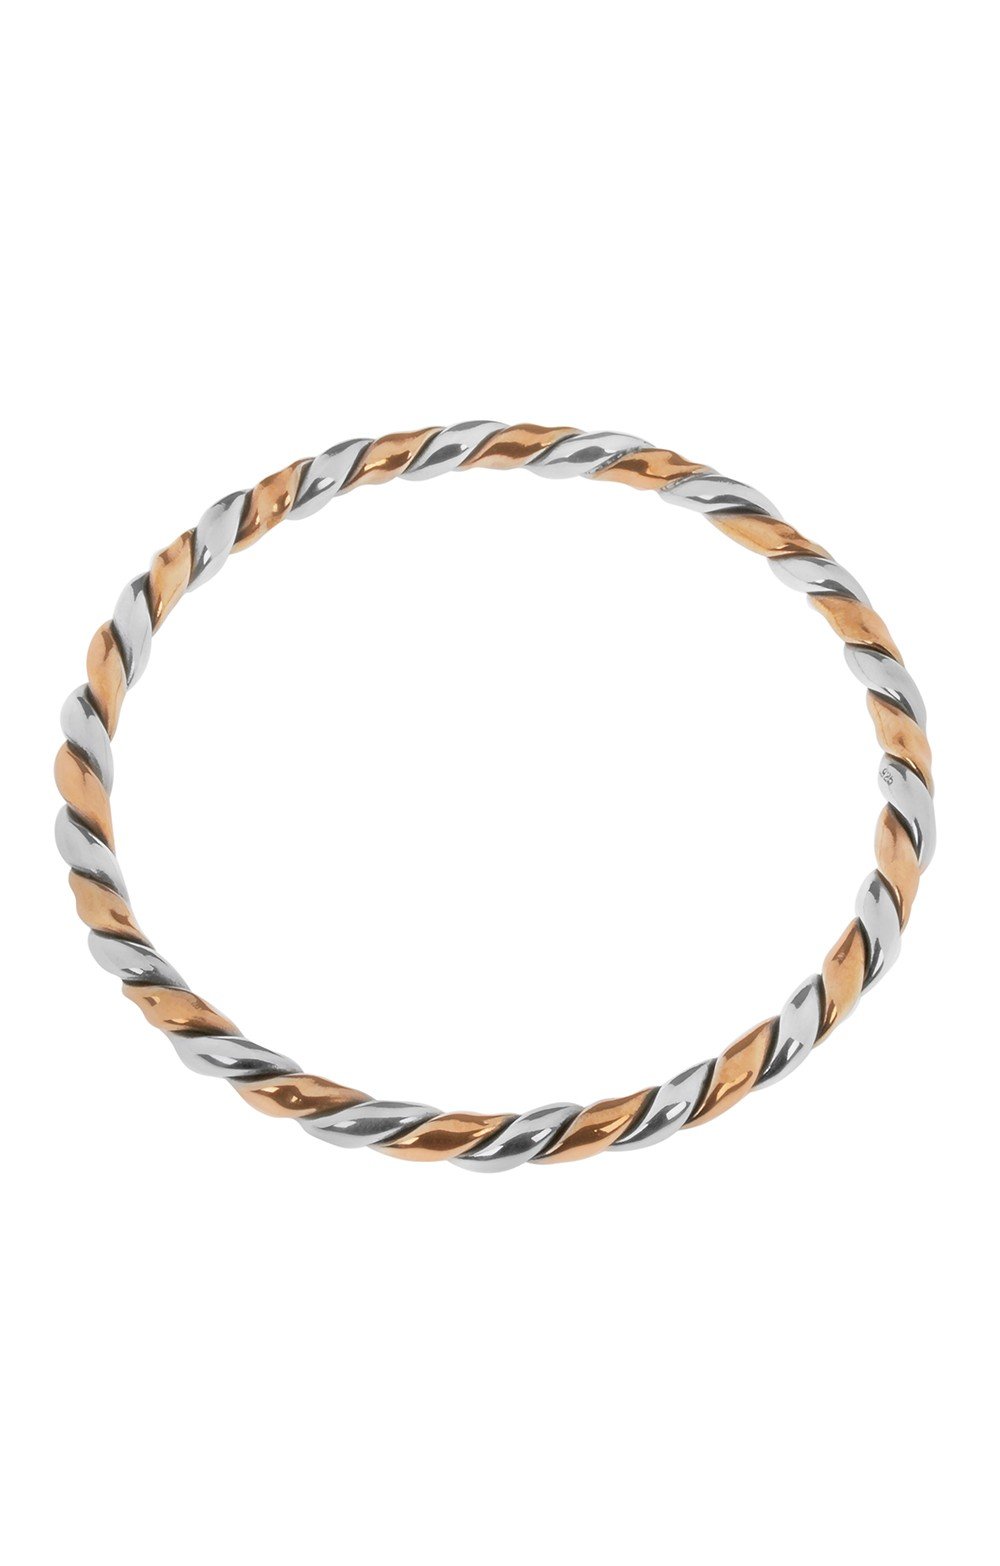 Silver and Copper Rope Bangle